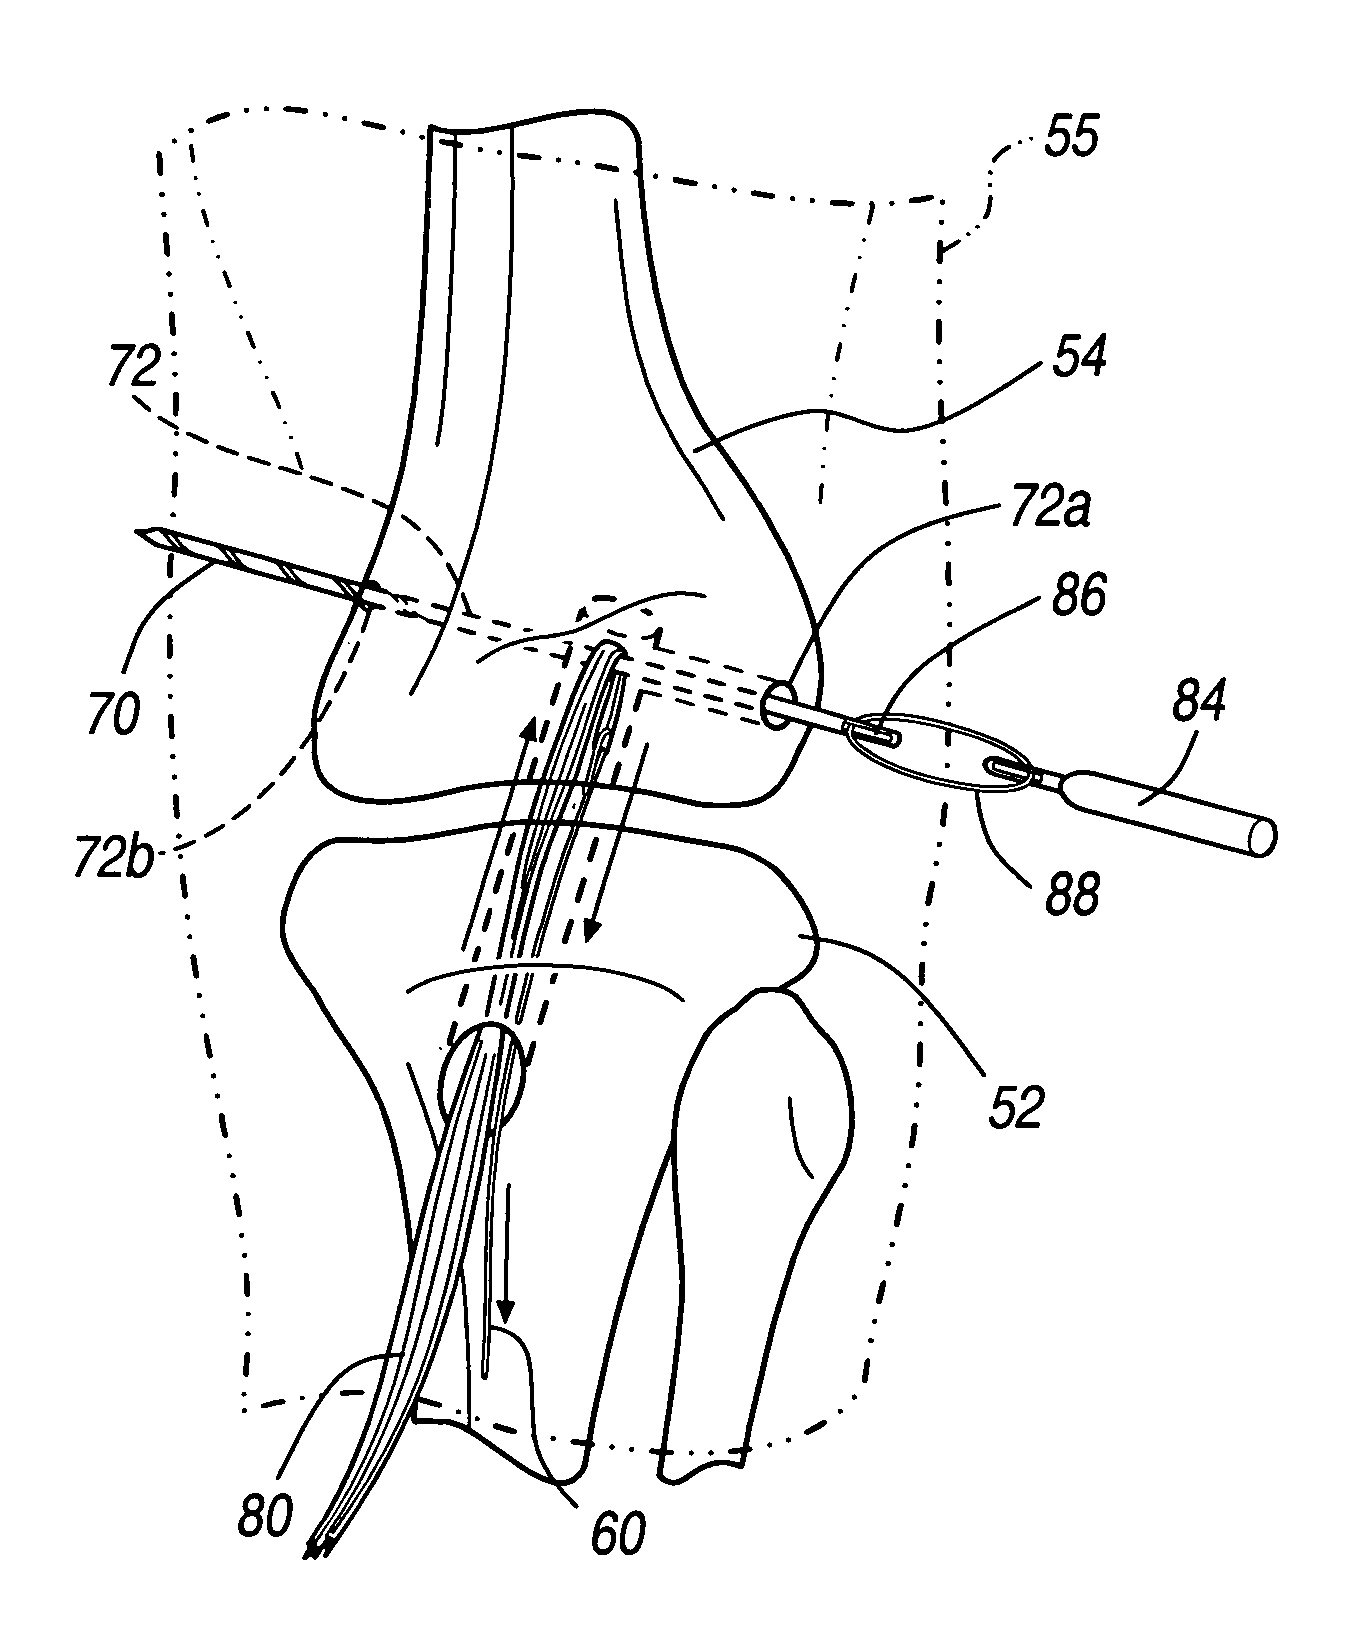 Apparatus and method for manipulating a flexible strand and soft tissue replacement during surgery